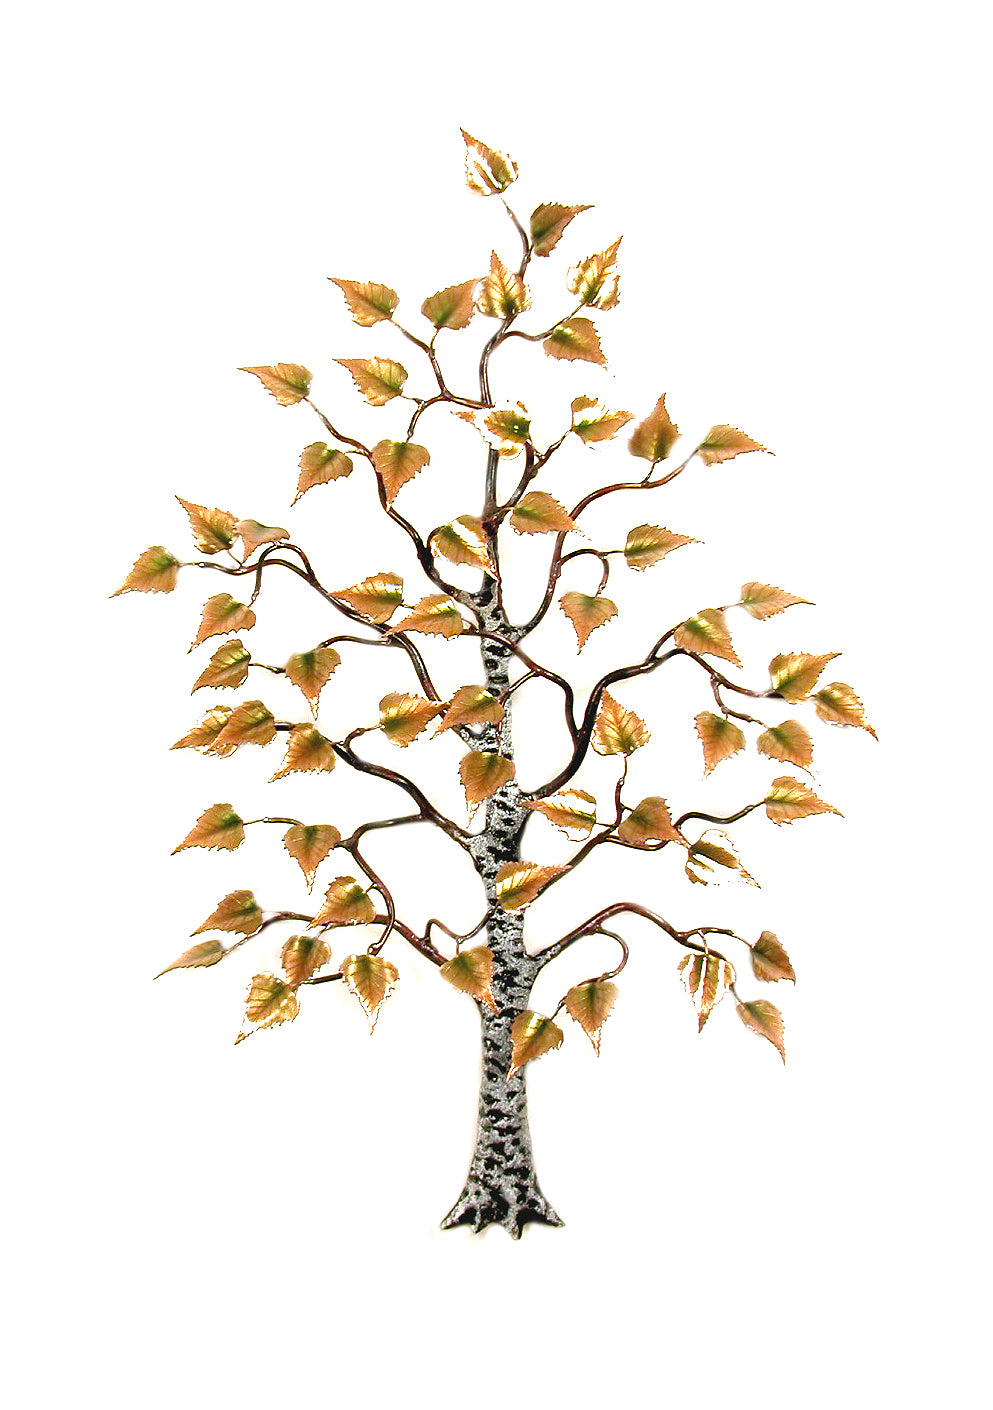 Birch Tree with Enameled Leaves by Bovano Cheshire